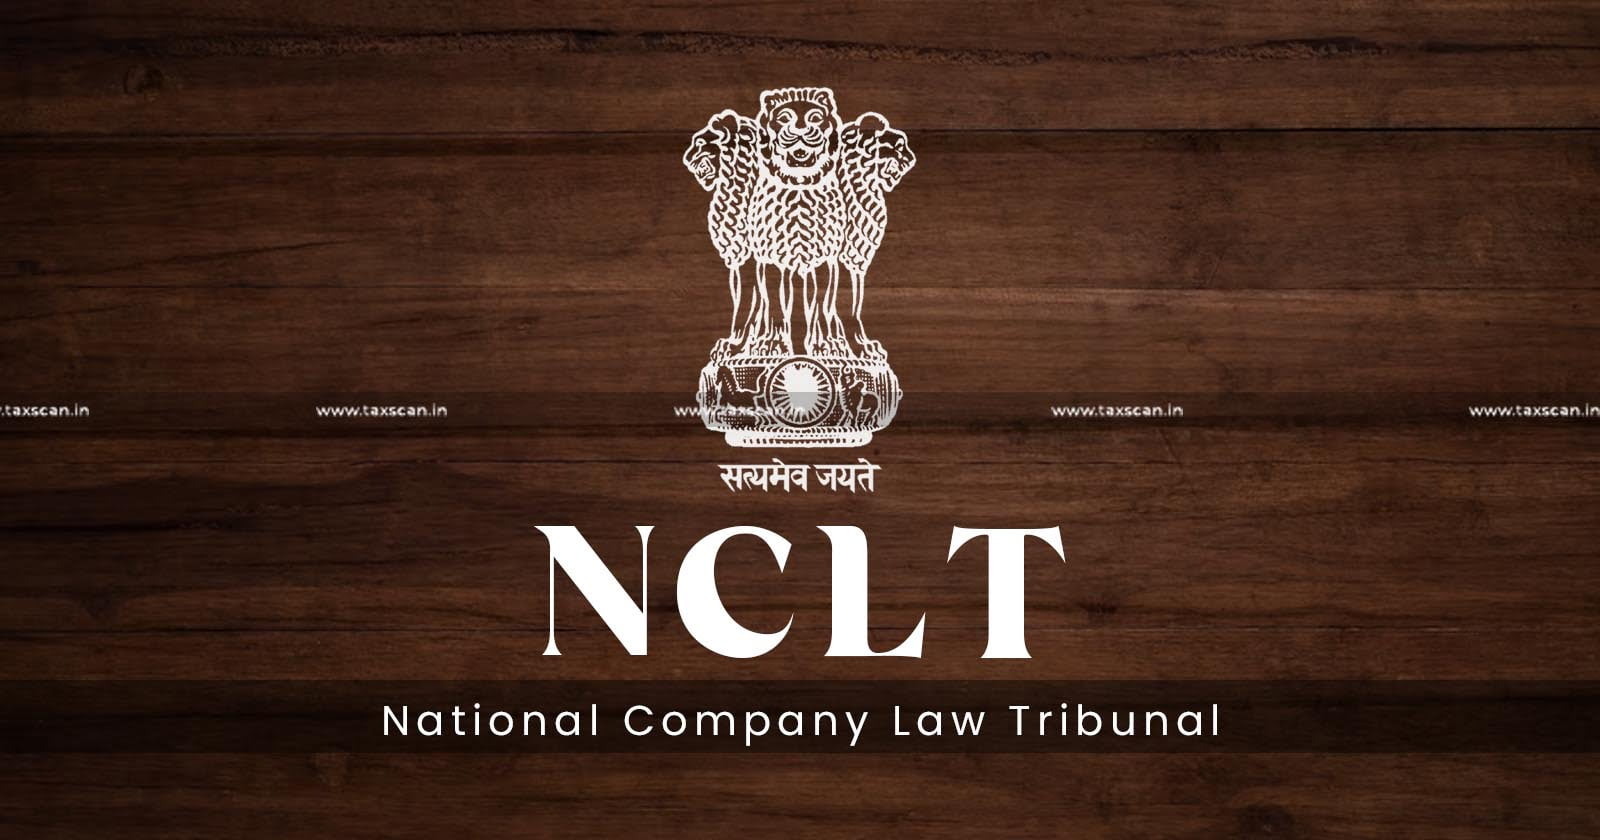 ibc rules and regulations - NCLT - NCLT Ruling on Liquidator Fee - Insolvency and Bankruptcy Code - NCLT Case Law Liquidation Fees - taxscan